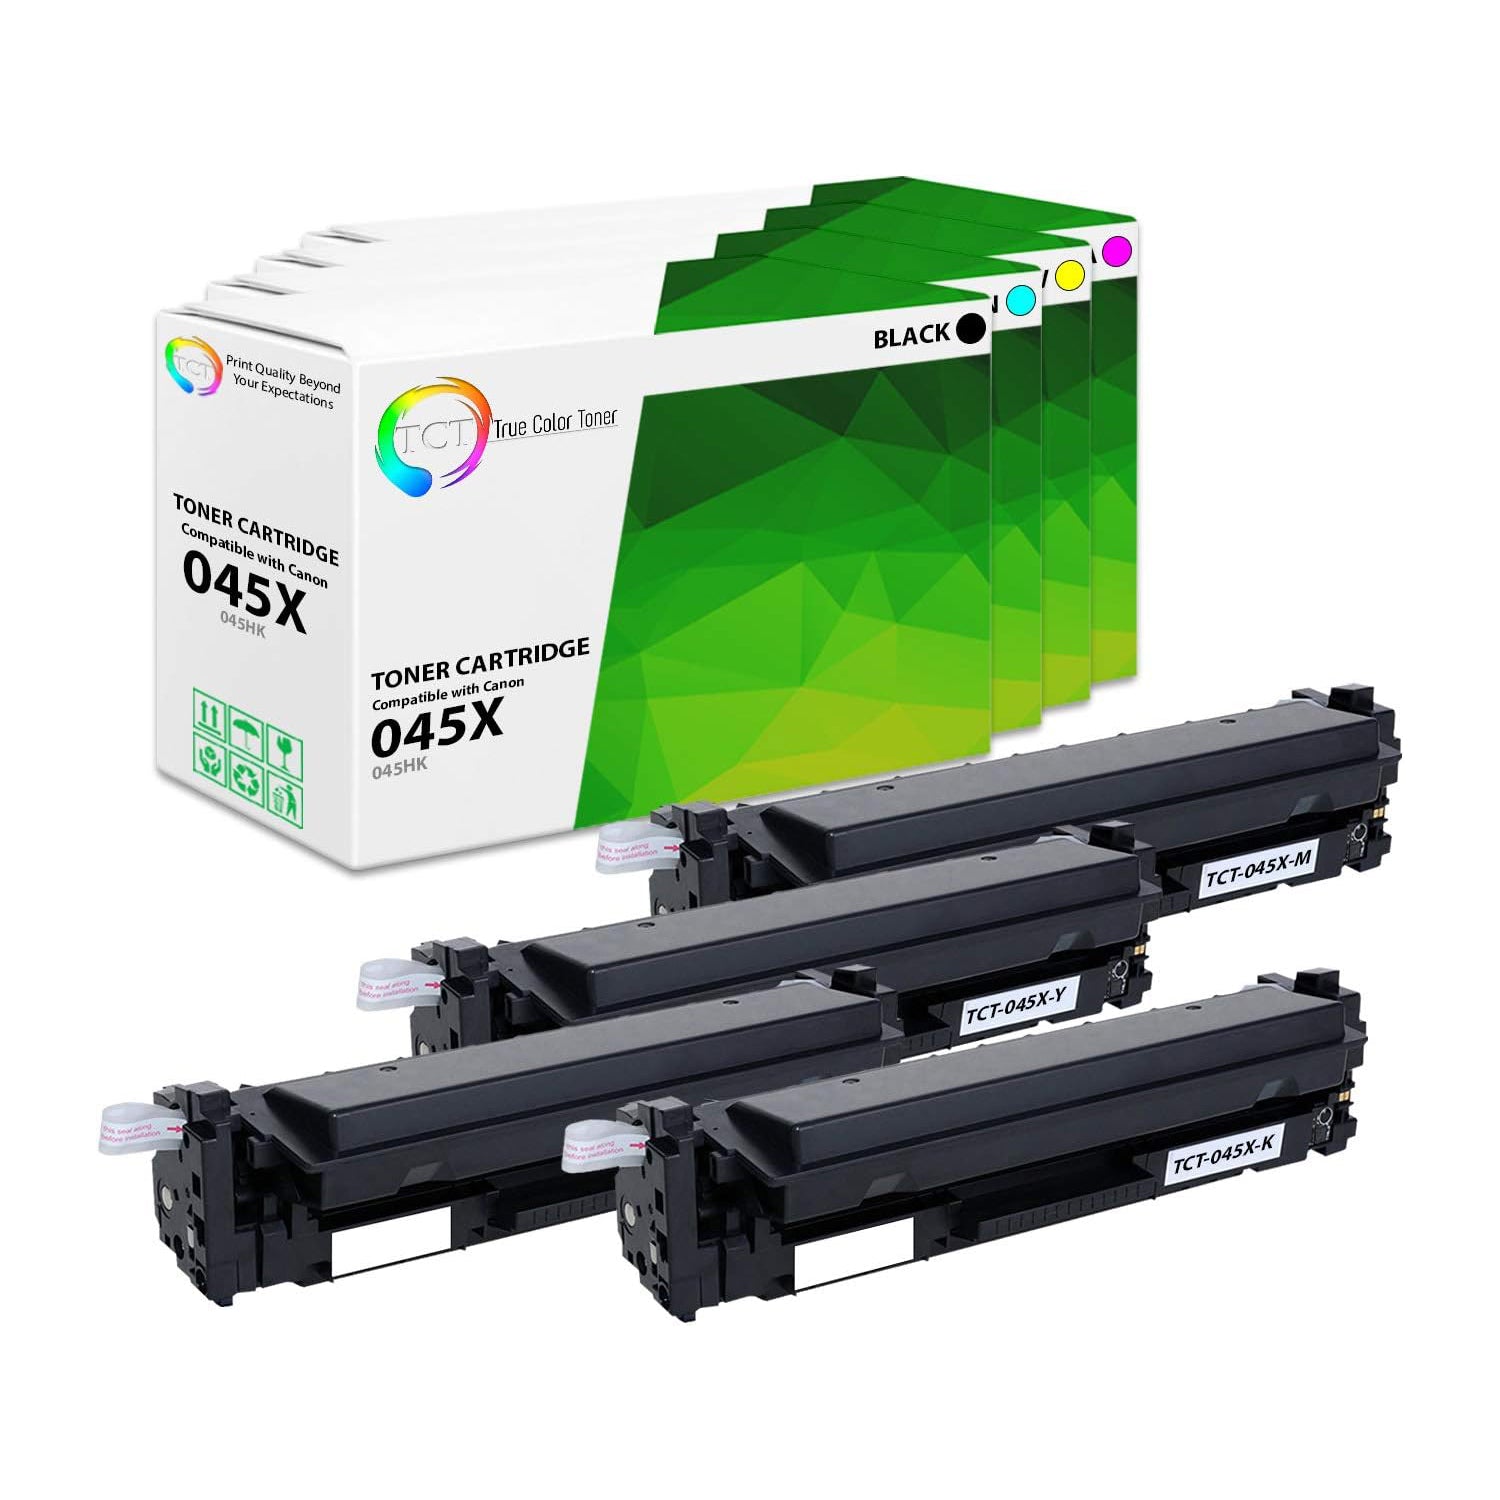 TCT Compatible HY Toner Cartridge Replacement for the Canon 045 Series - 4 Pack (BK, C, M, Y)